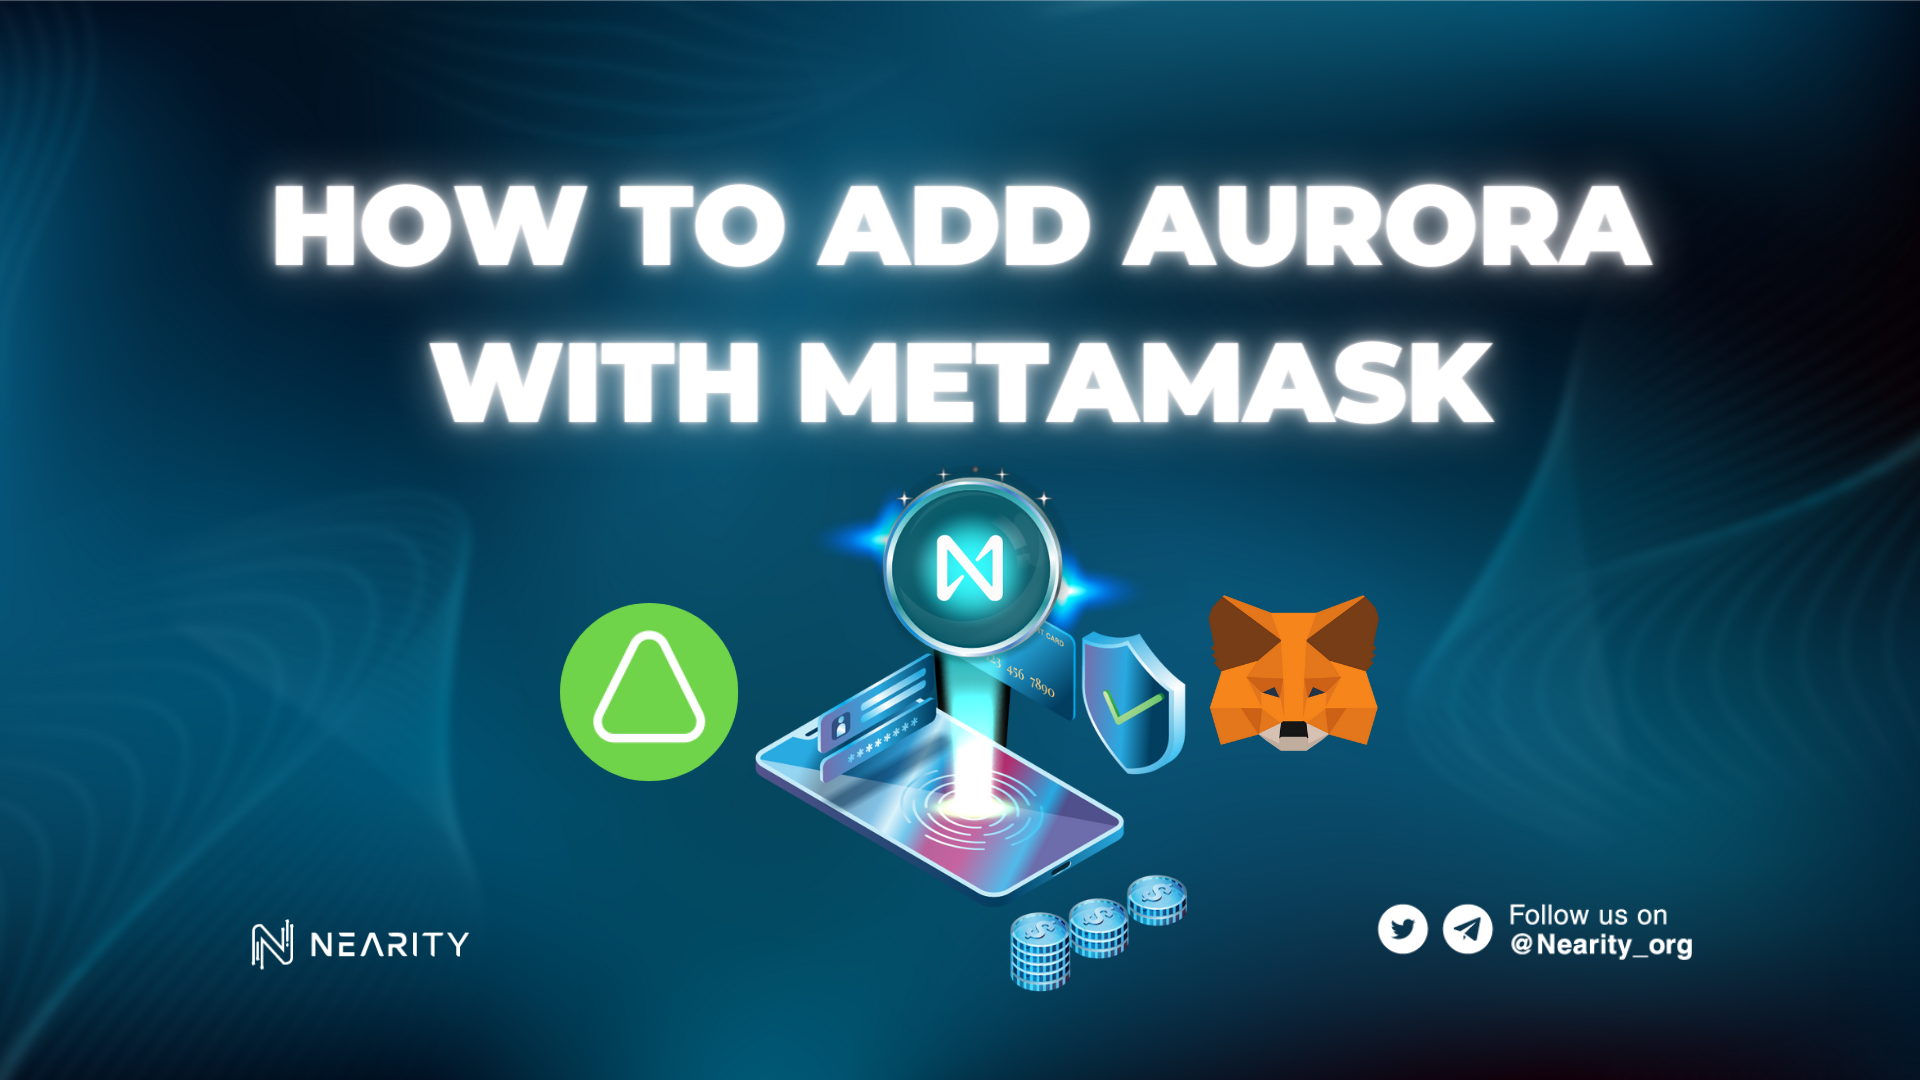 How to add Aurora to MetaMask